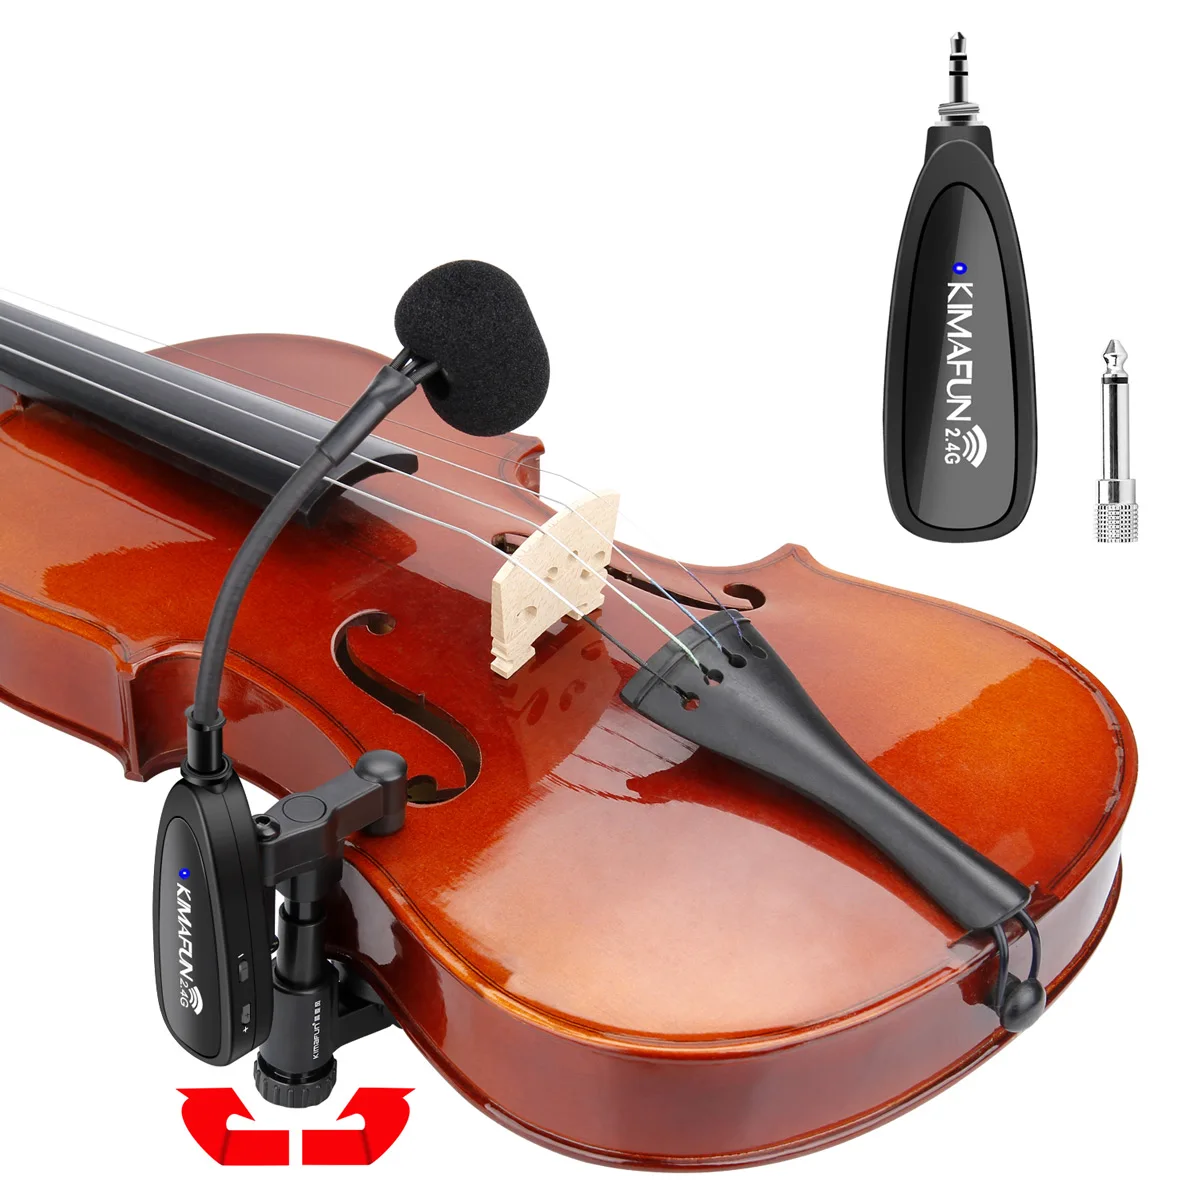 

KIMAFUN 2.4G Wireless Violin Microphone Instrument Gooseneck Mic Professional Musical Condenser Microphone for Stage Performance